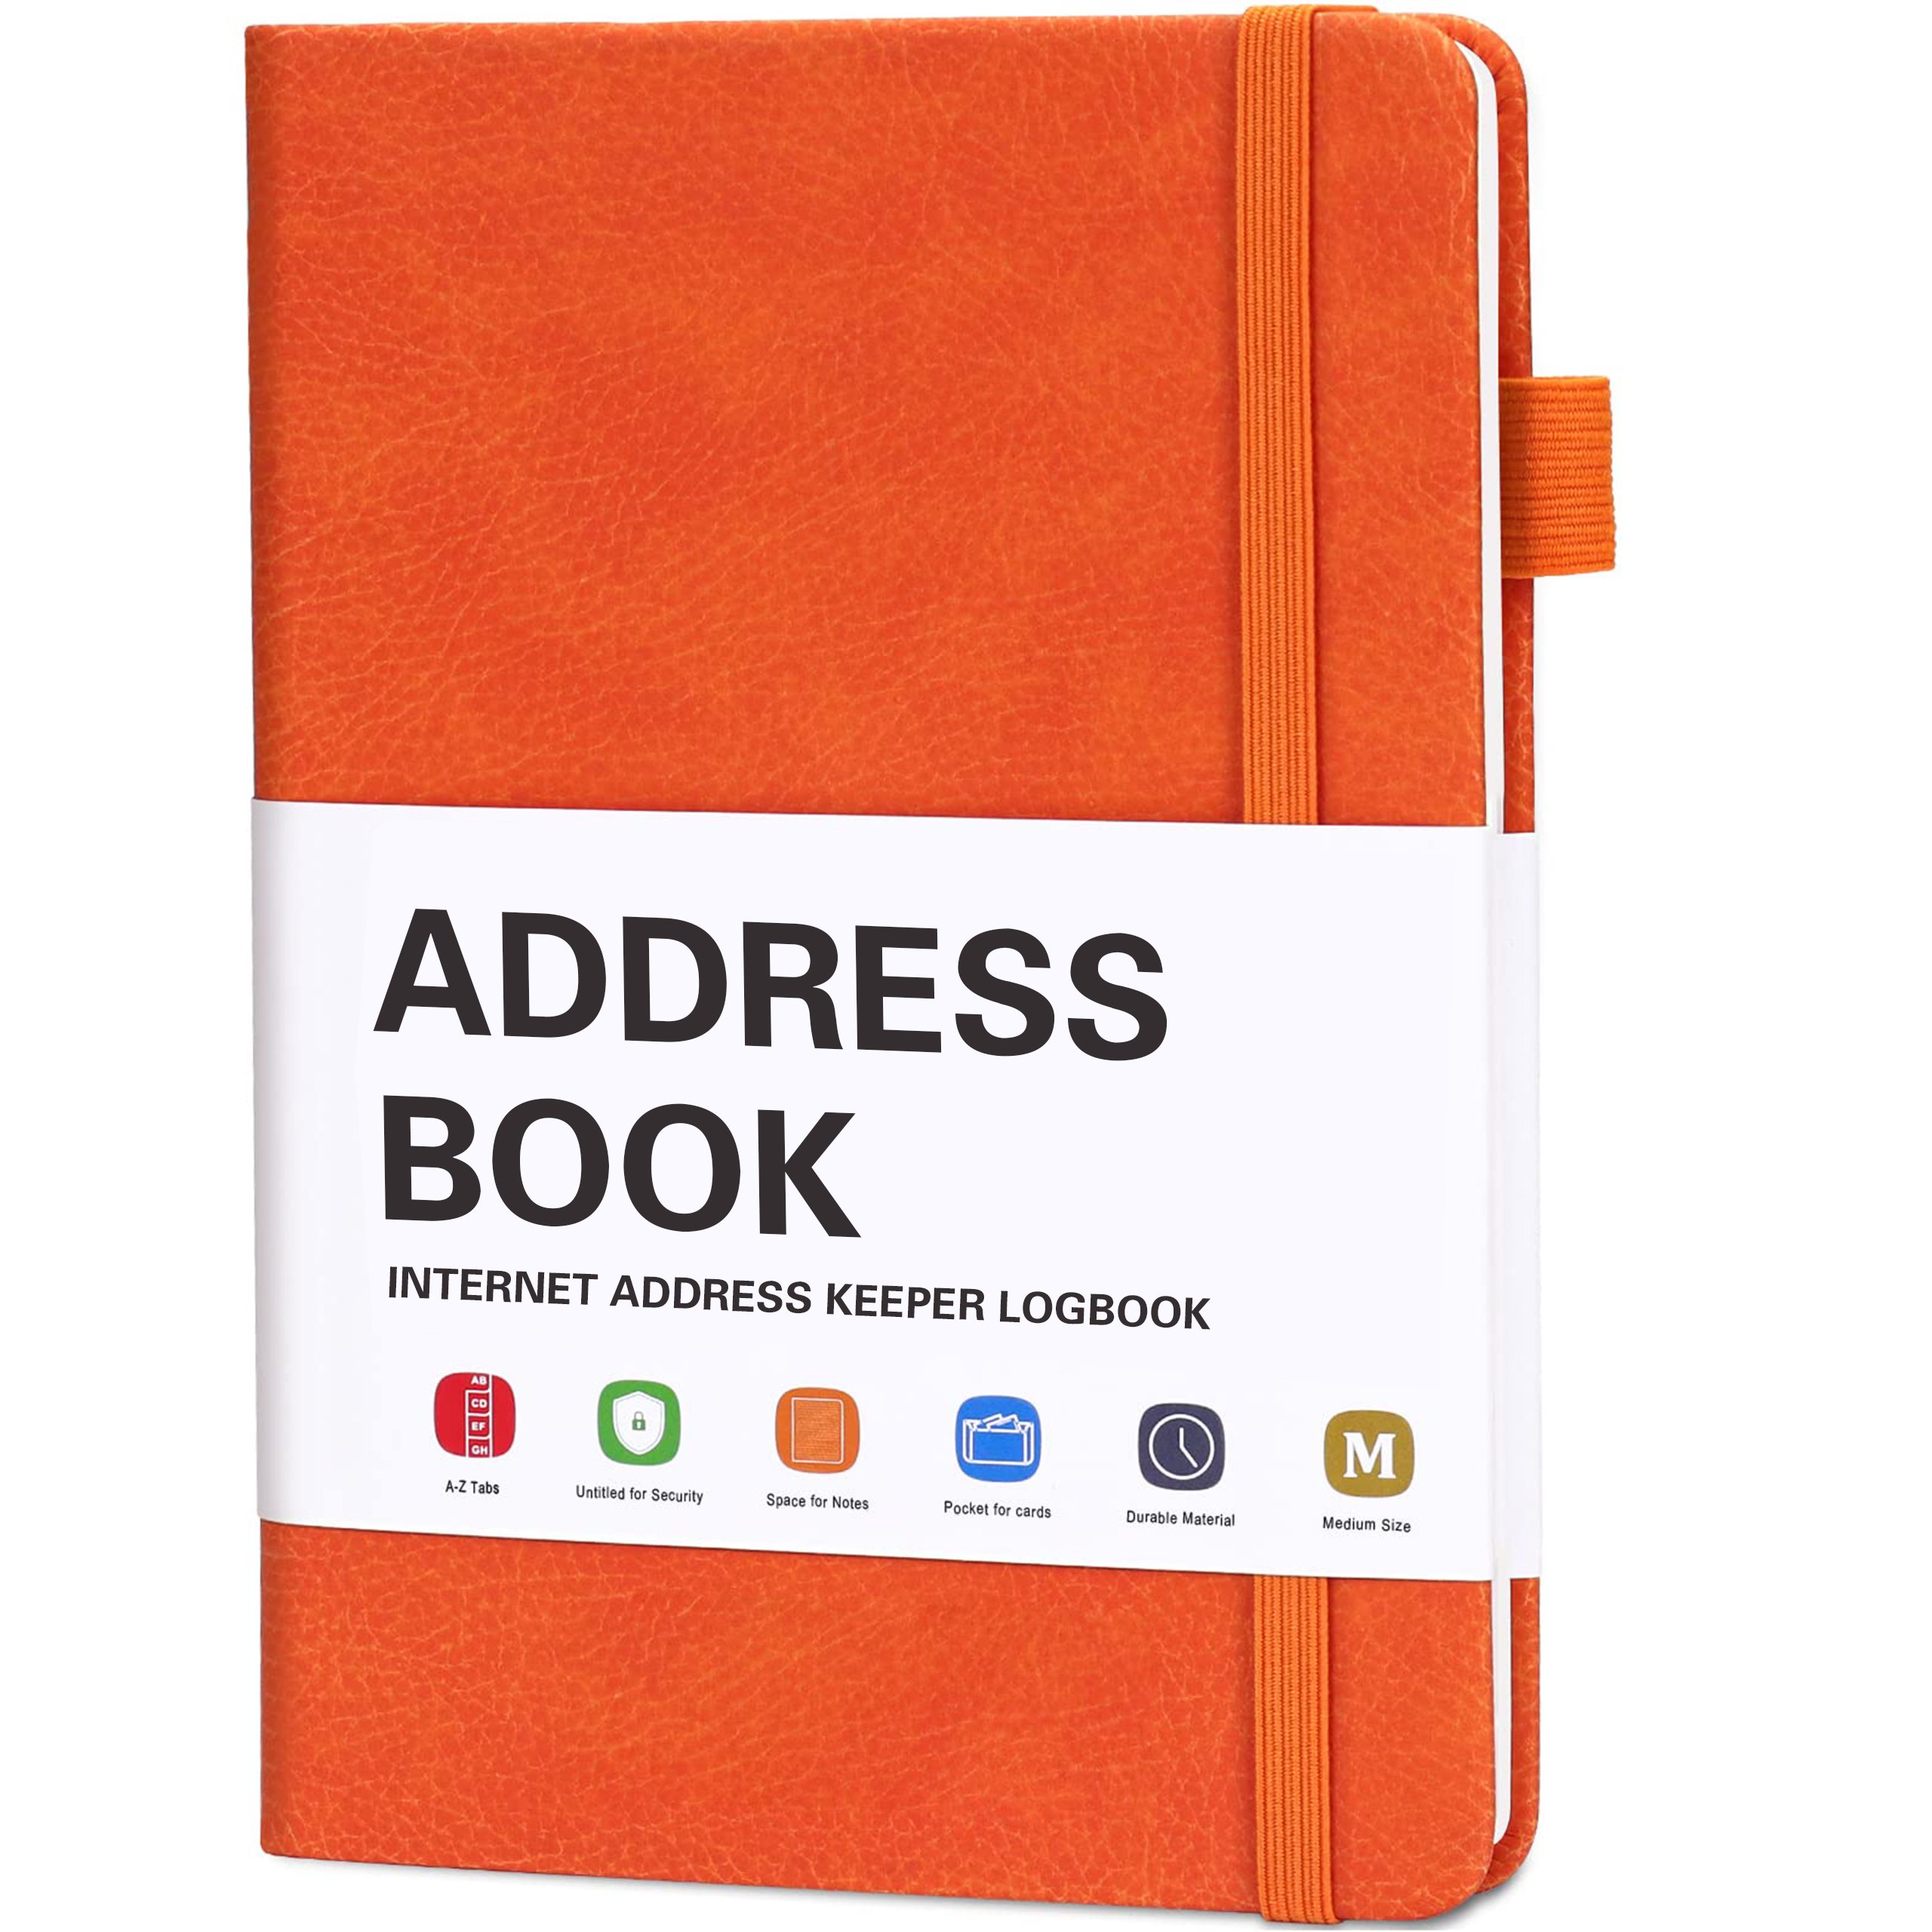 How to customized cover and pages of password log book and internet password organizer?